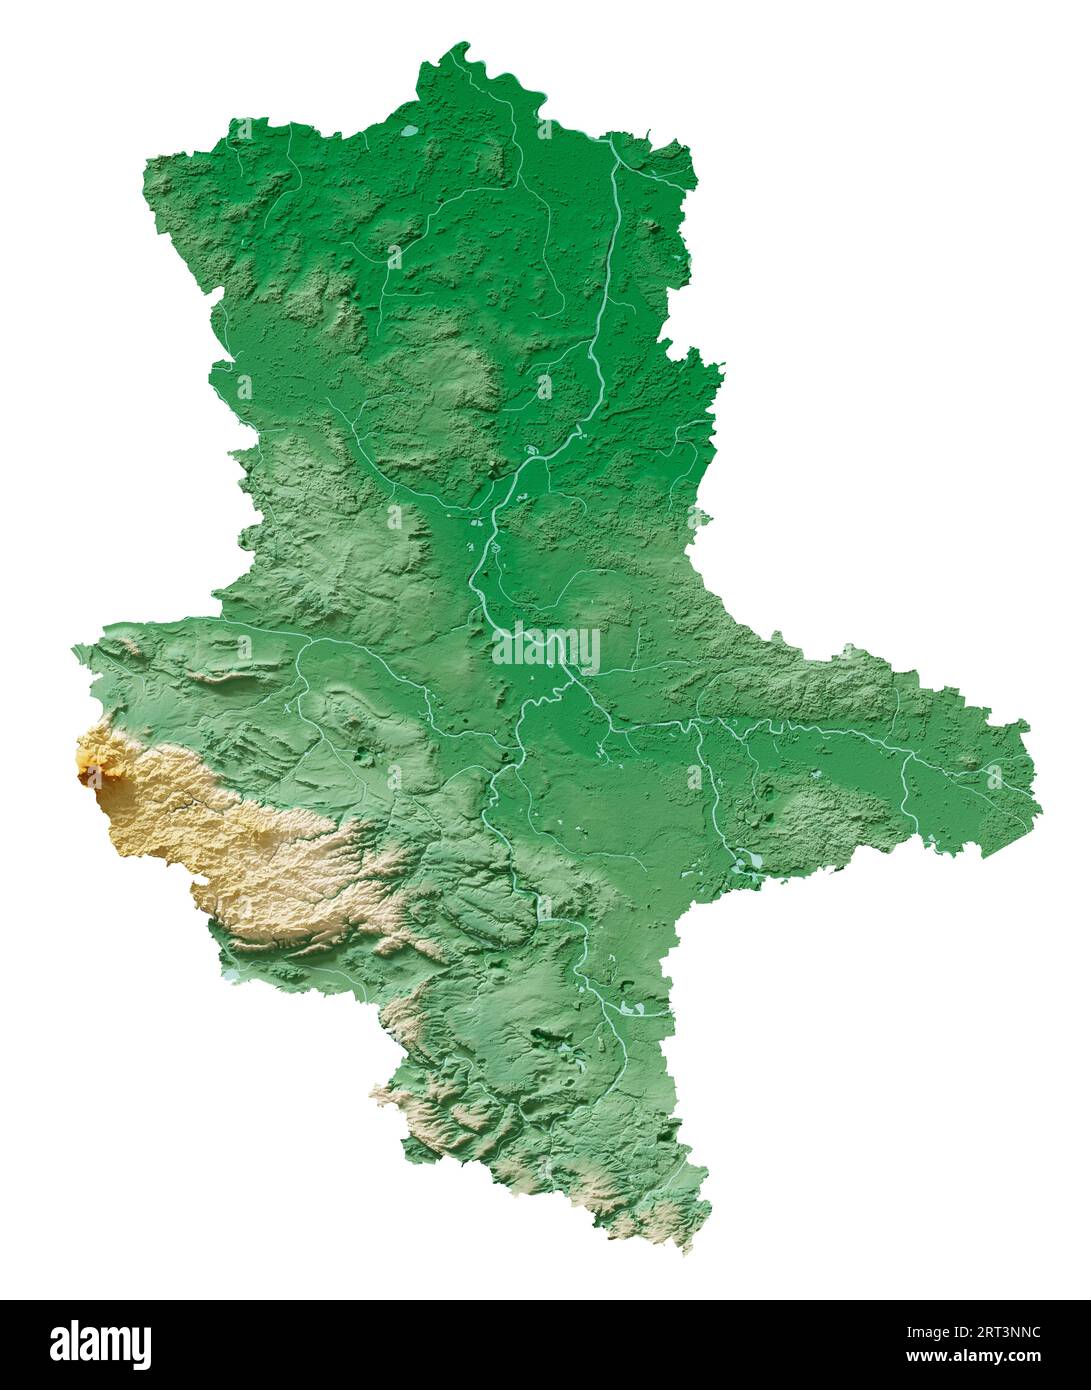 Sachsen-Anhalt. German state (Land). Detailed 3D rendering of a shaded relief map, rivers, lakes. Colored by elevation. Pure white background. Stock Photo